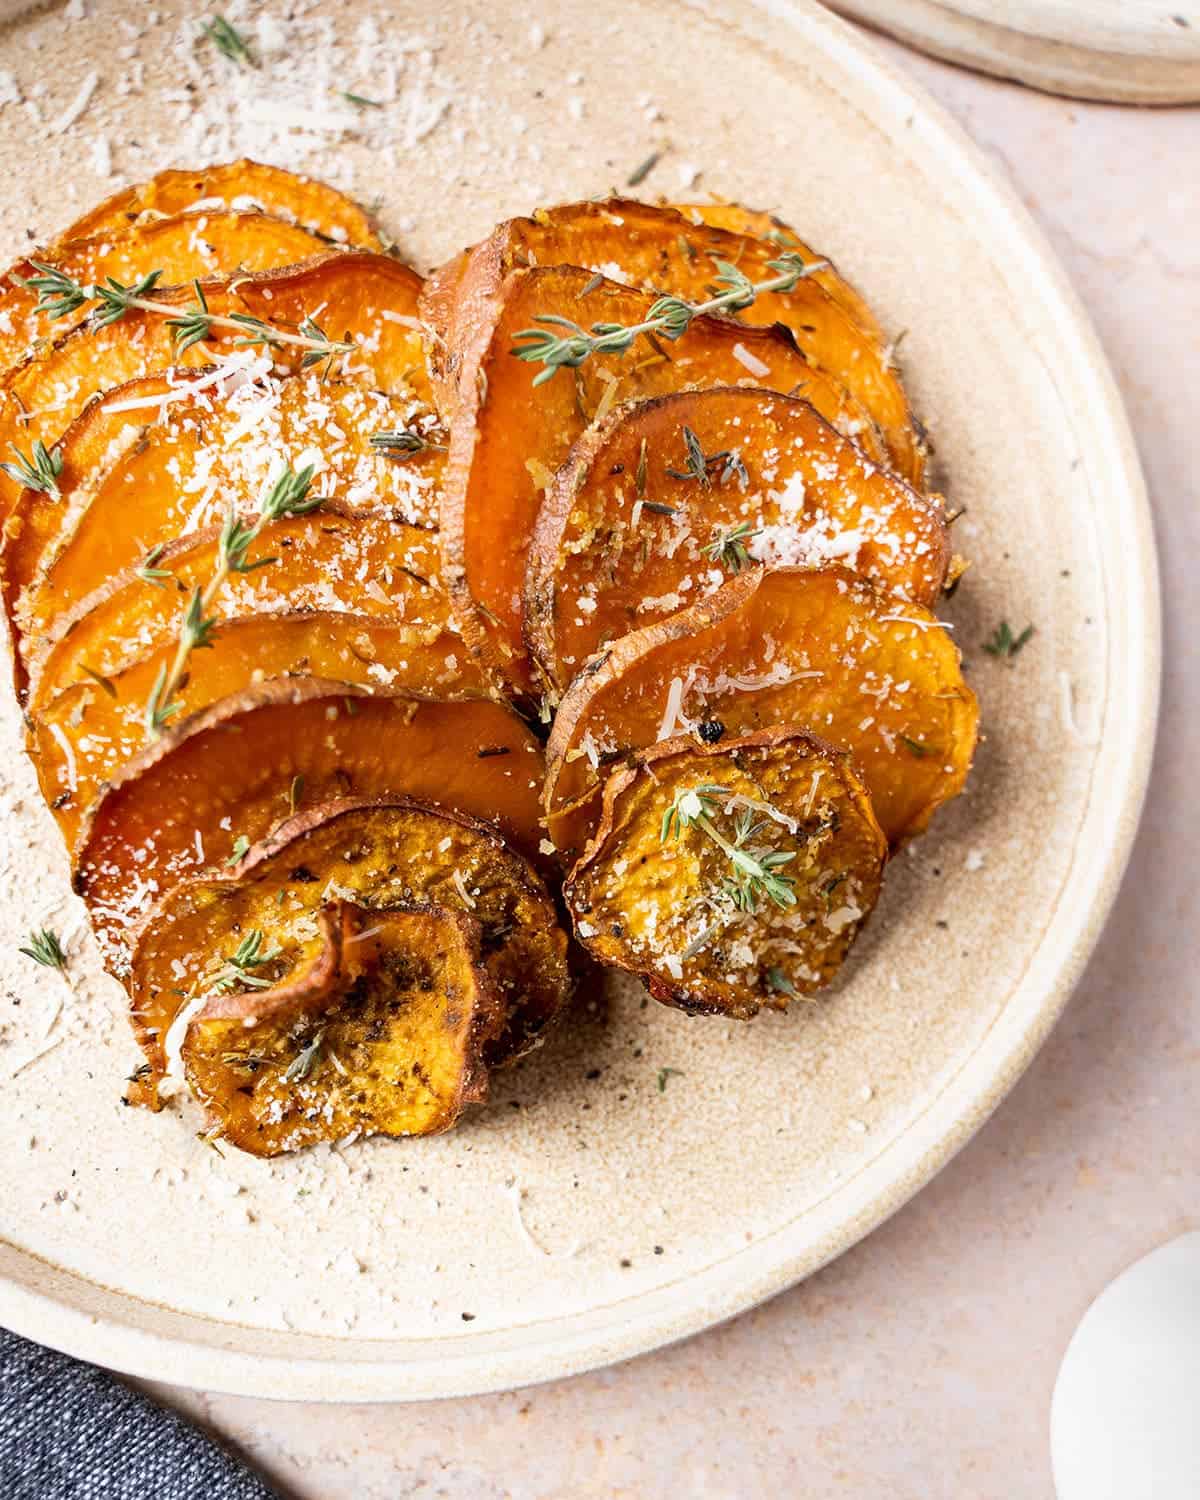 Sweet potato rounds on a plate with fresh thyme.